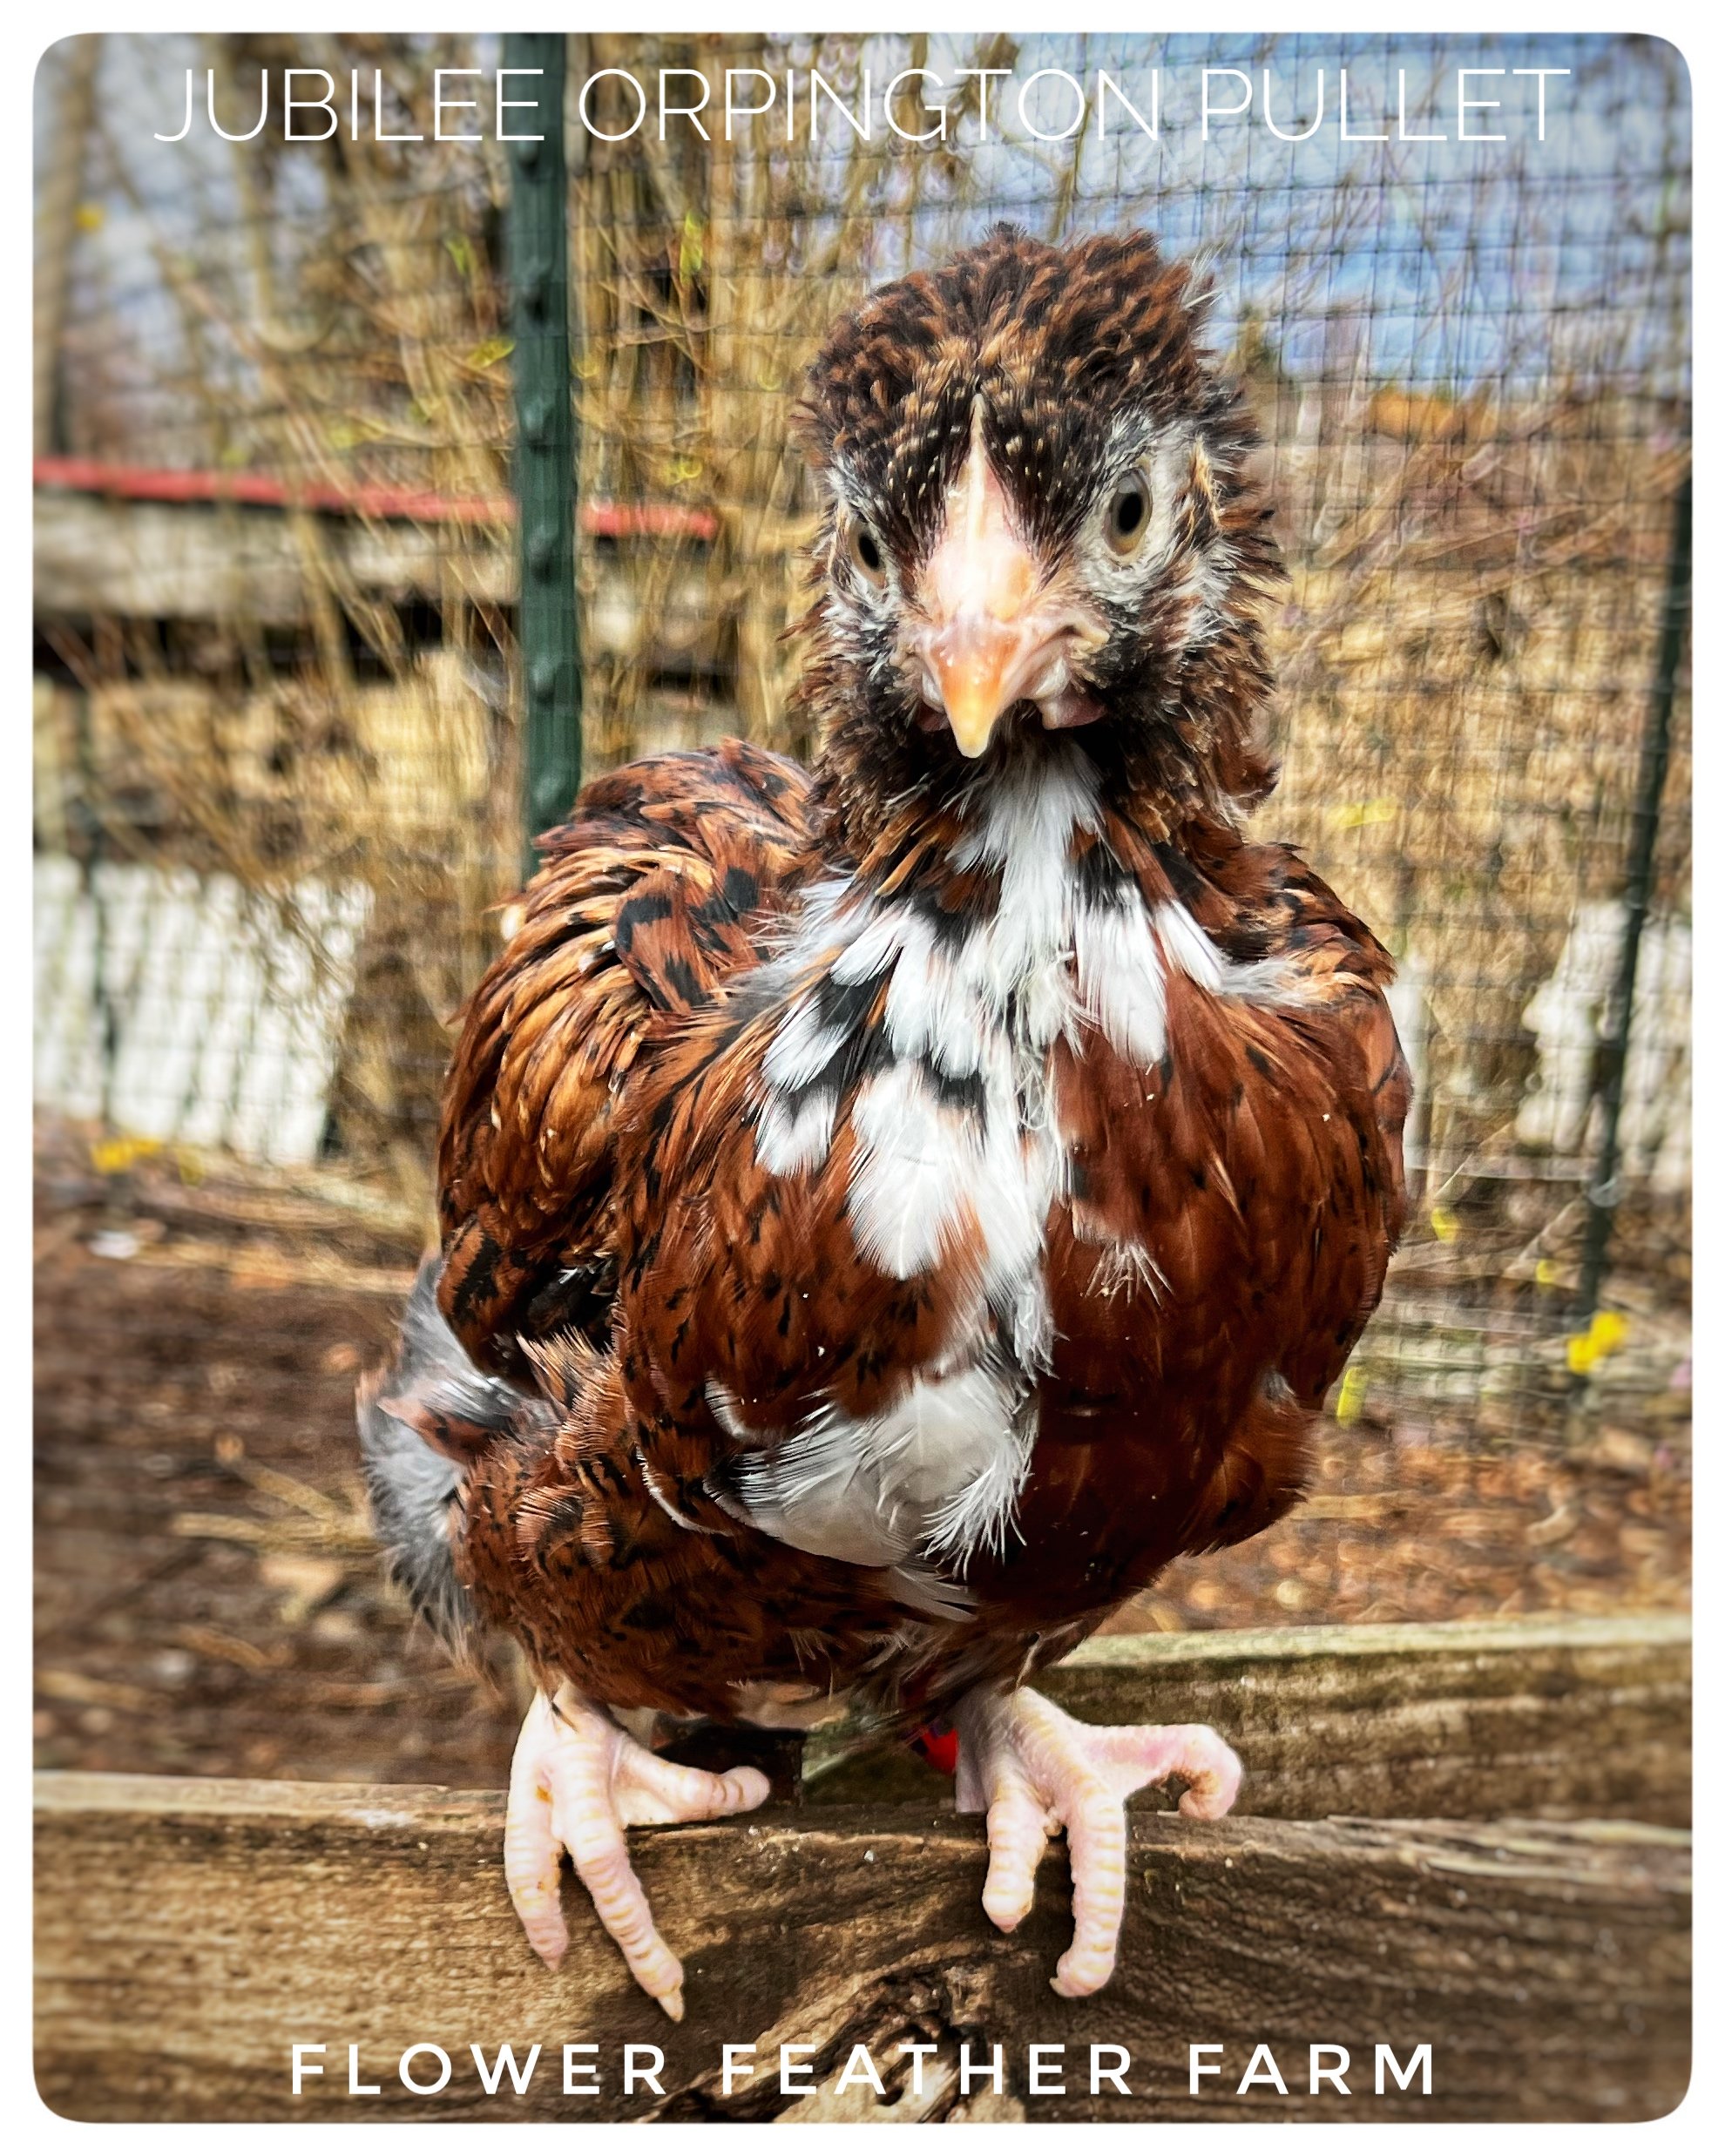 Jubilee Orpington Pullet at Flower Feather Farm, chicks &amp; dahlias, a chick hatchery near me